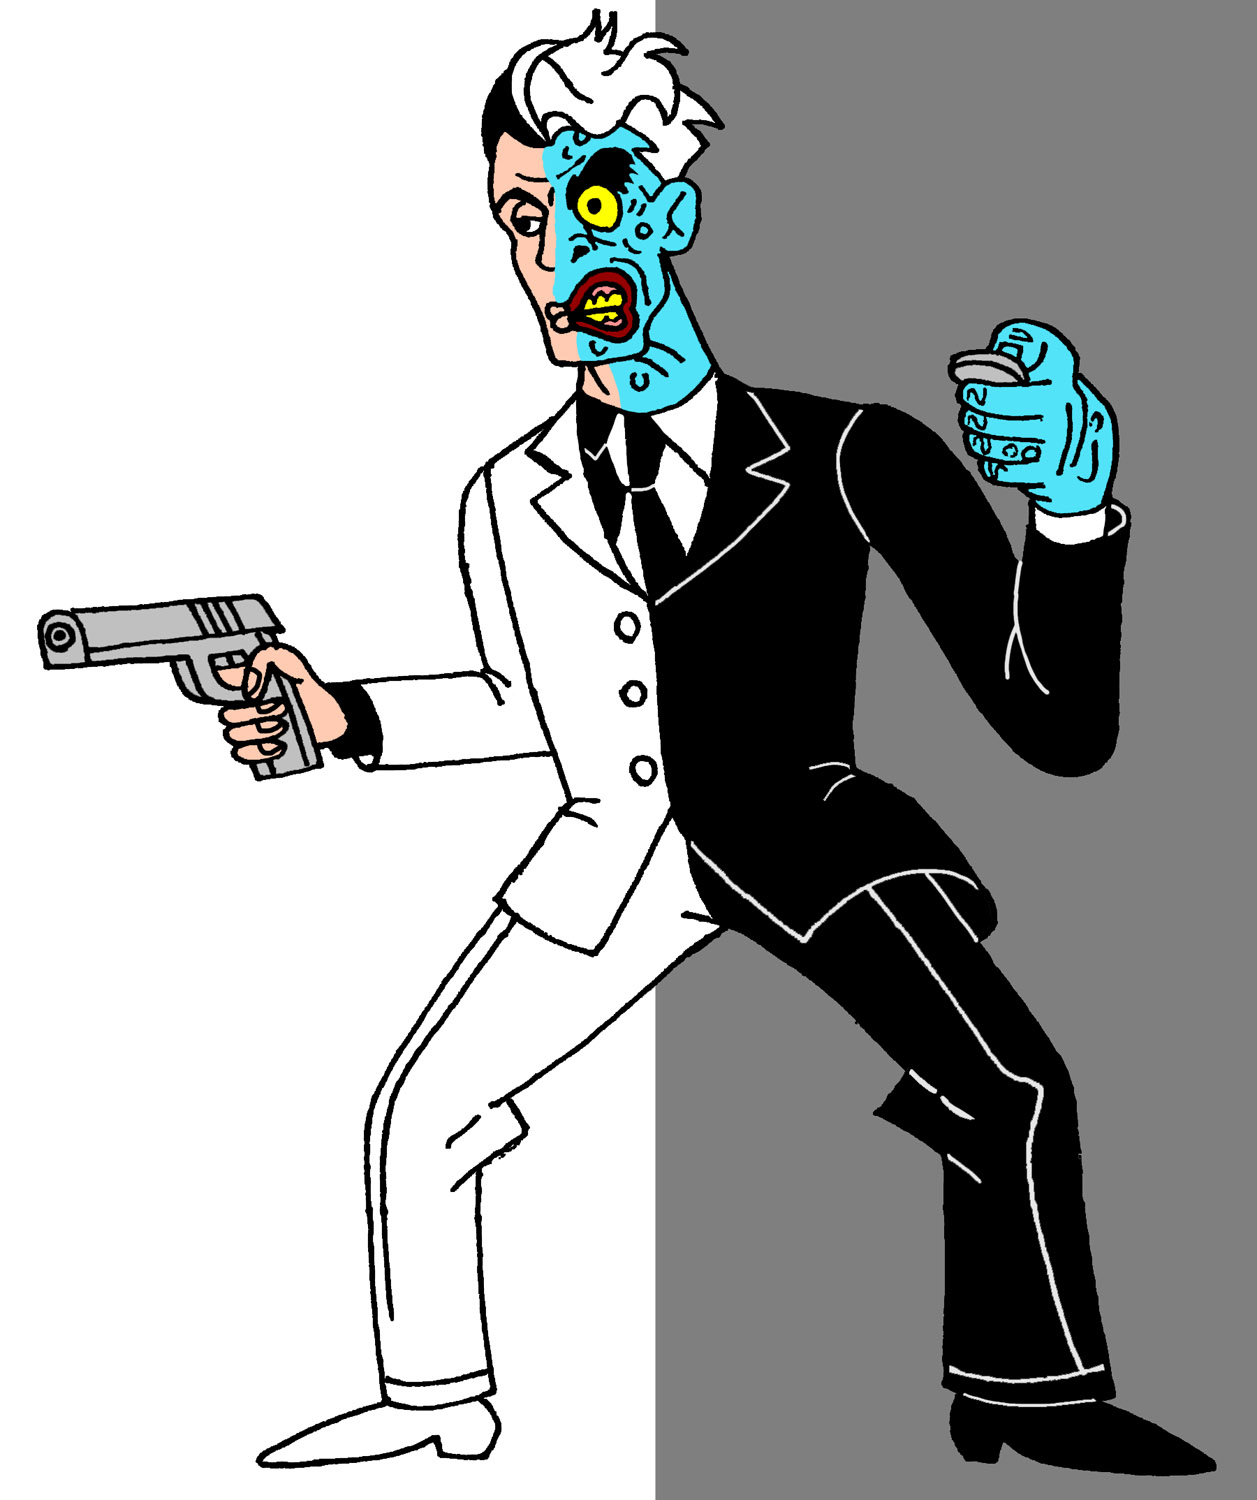 Two-Face (Batman the Animated Series) by Rodan5693 on DeviantArt